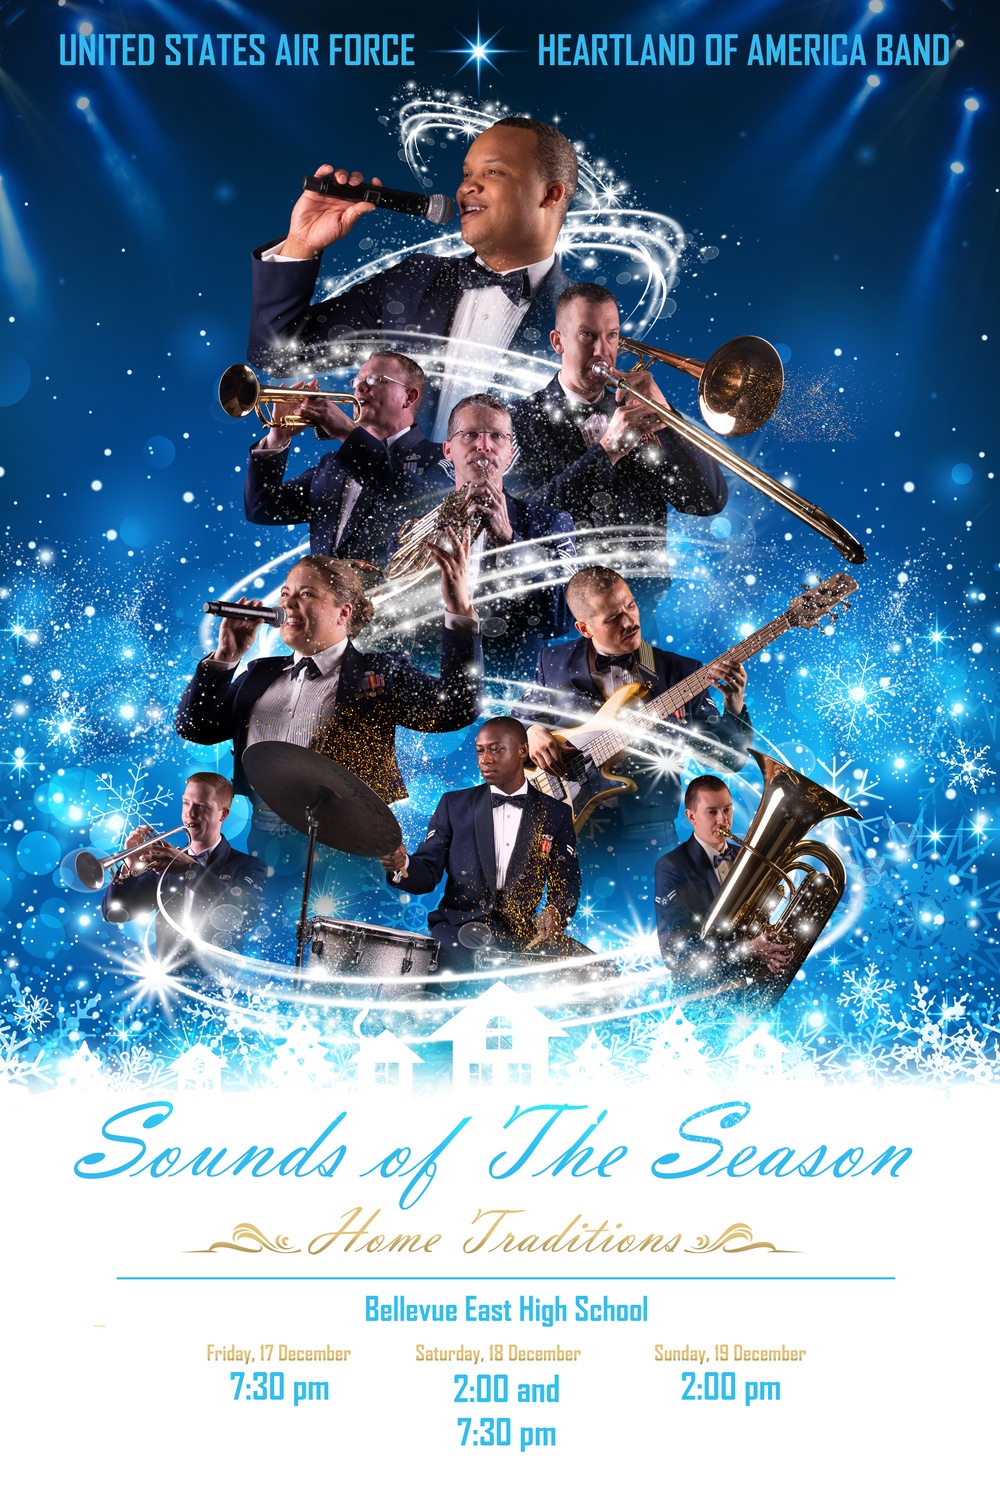 Sounds of the Season Concert Series